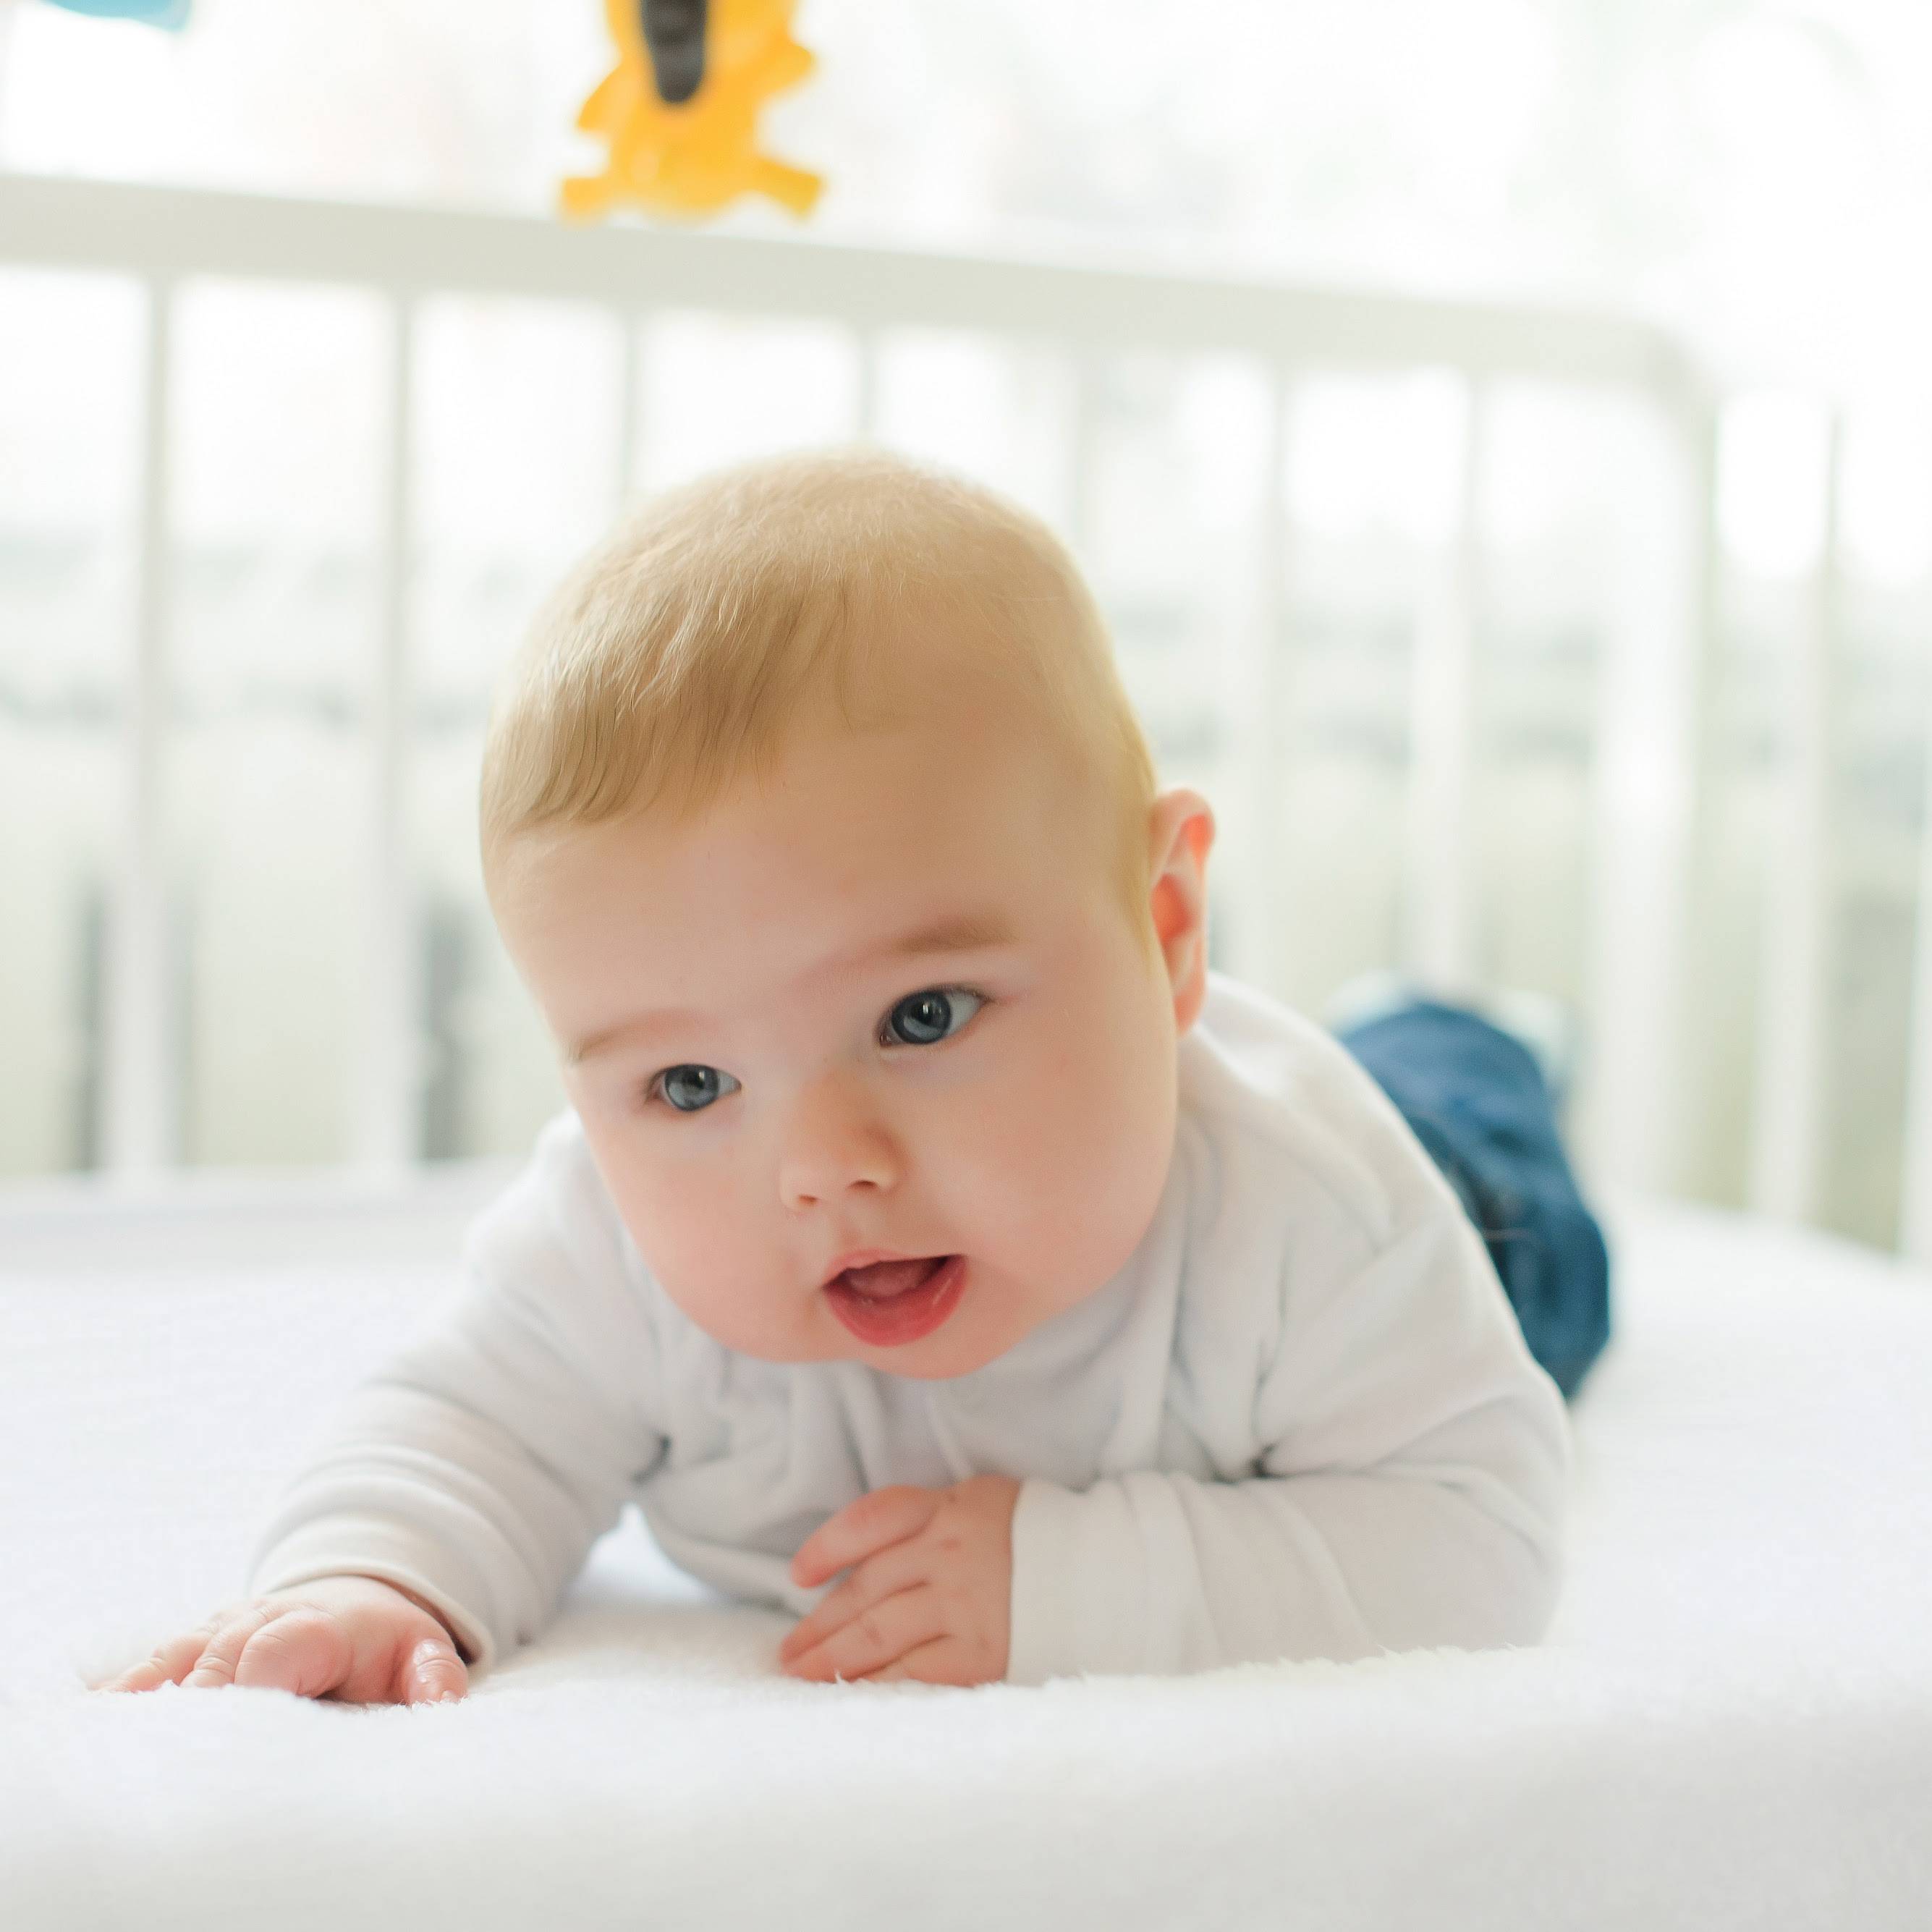 Baby boy on a 100% Breathable mini crib mattress with firm support for safety and comfort.